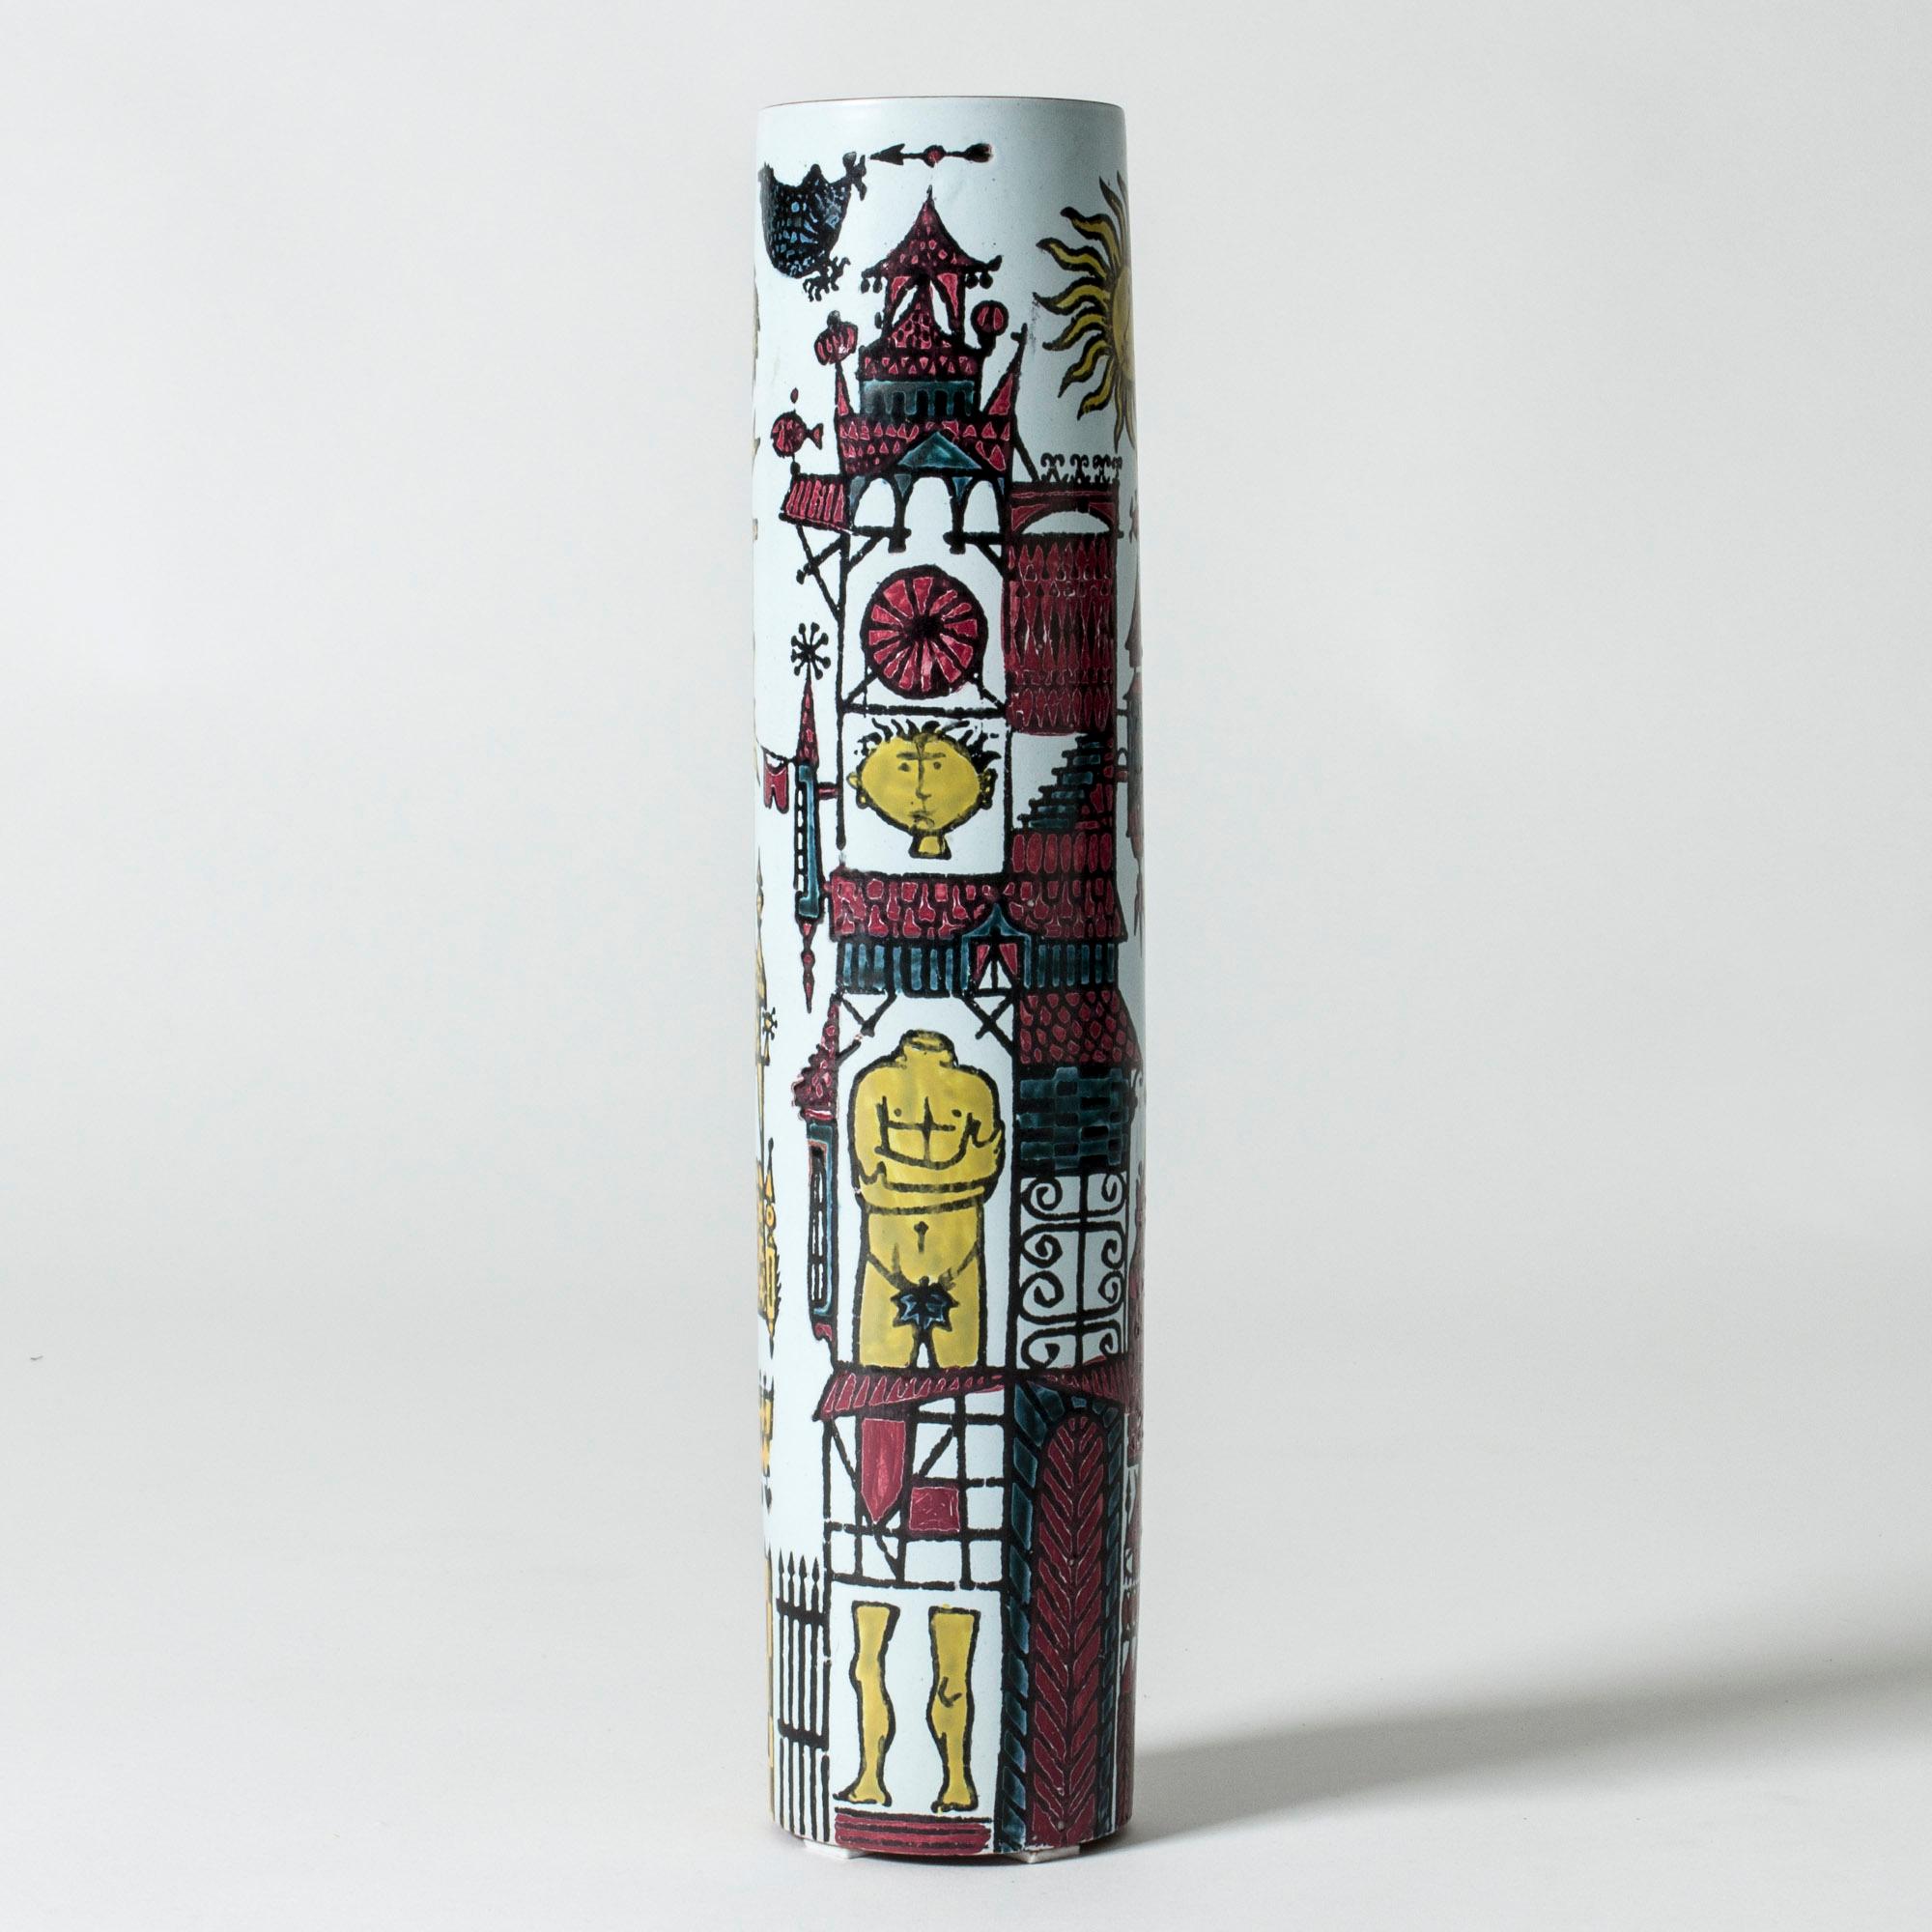 Faience “Karneval” vase by Stig Lindberg, in a long cylinder shape. Beautiful, playful motif of a fantasy town with graphic houses and people. The rim is unglazed, giving an organic touch to the smooth design.

The “Karneval” series was produced